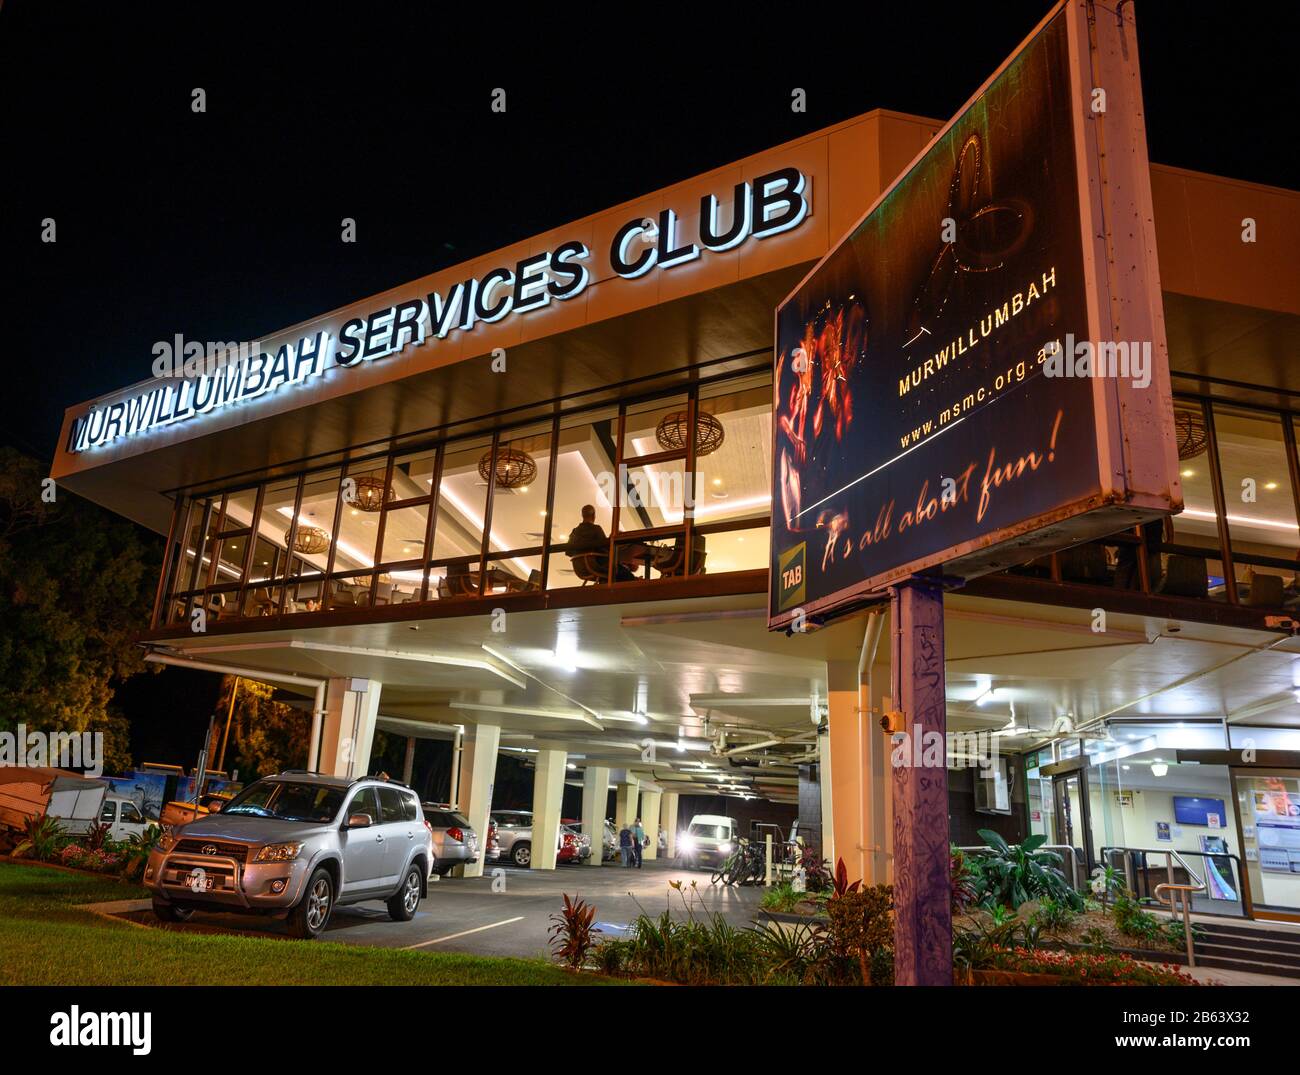 night view of the cbd in Murwillumbah in northern new south wales, australia, showing the Murwillumbah services club or RSL Stock Photo